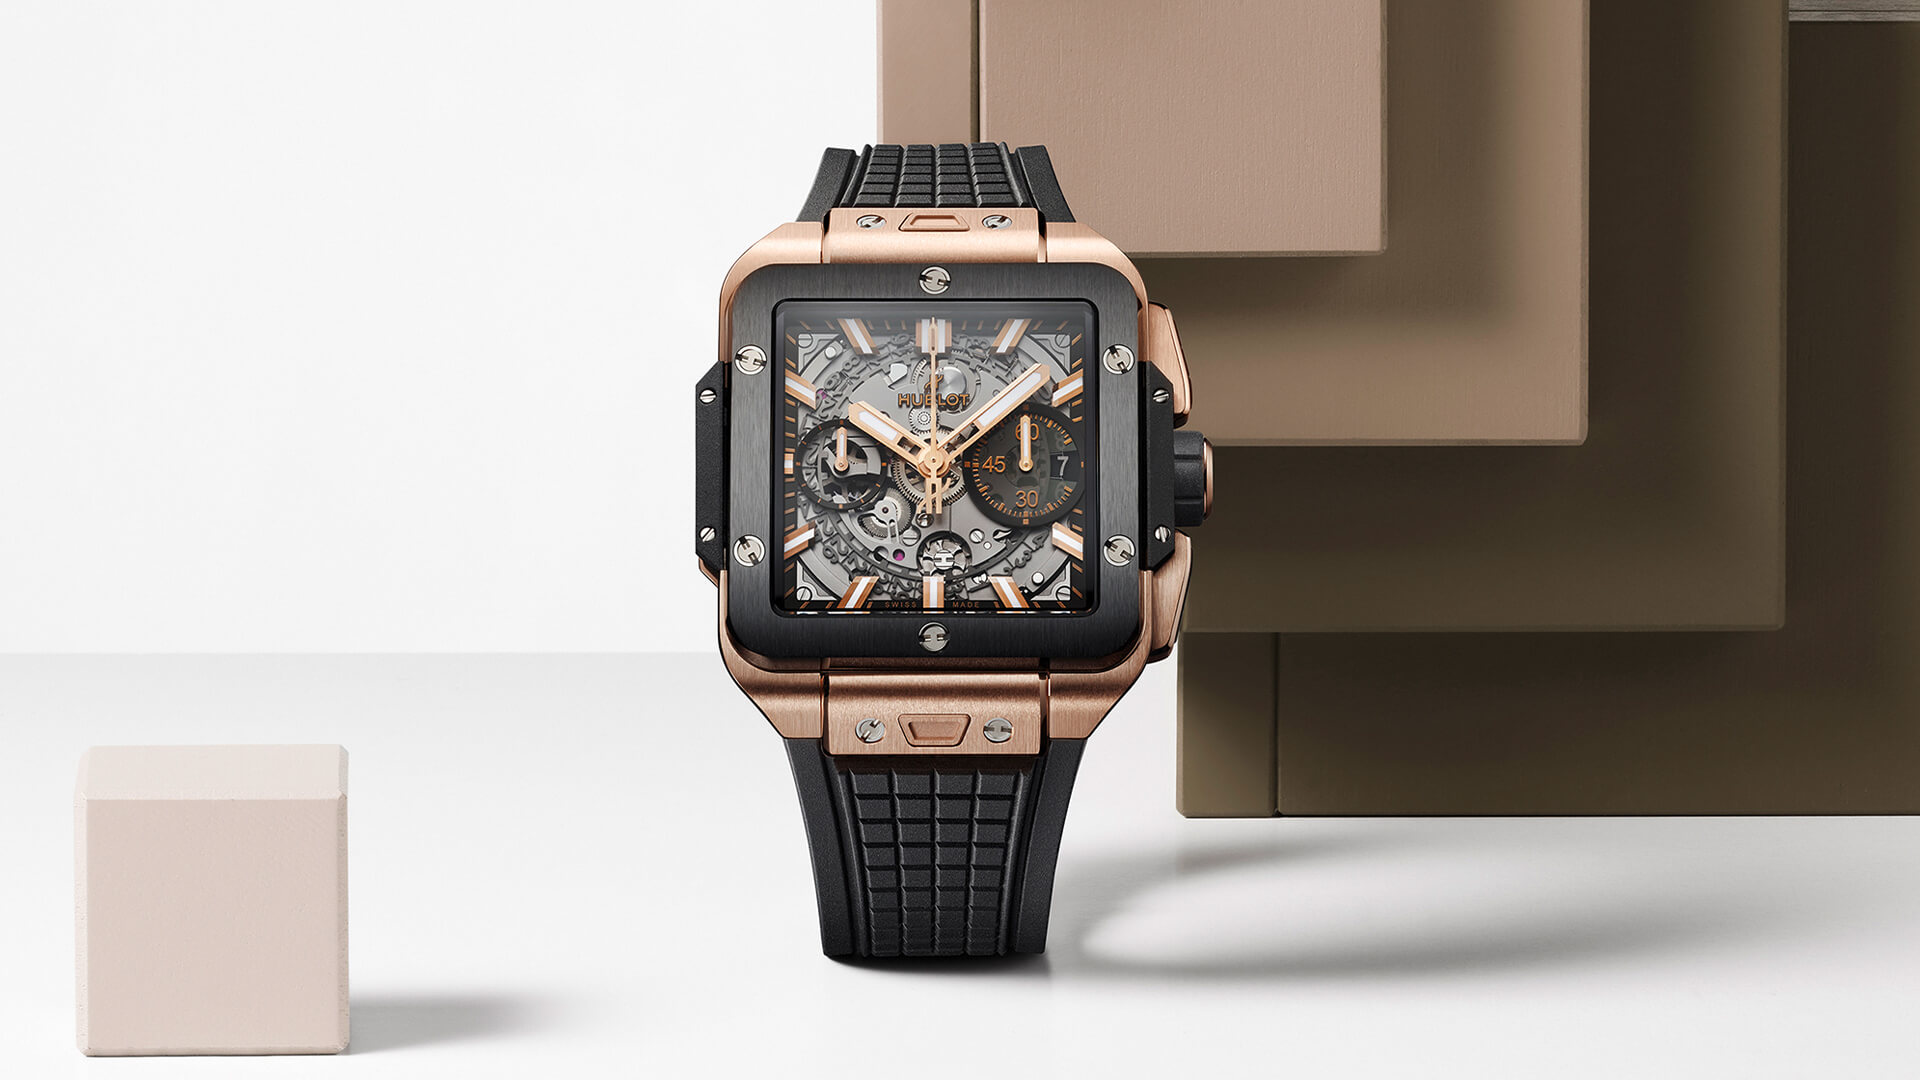 Introducing - All The New Hublot of Watches and Wonders 2022 (Prices)